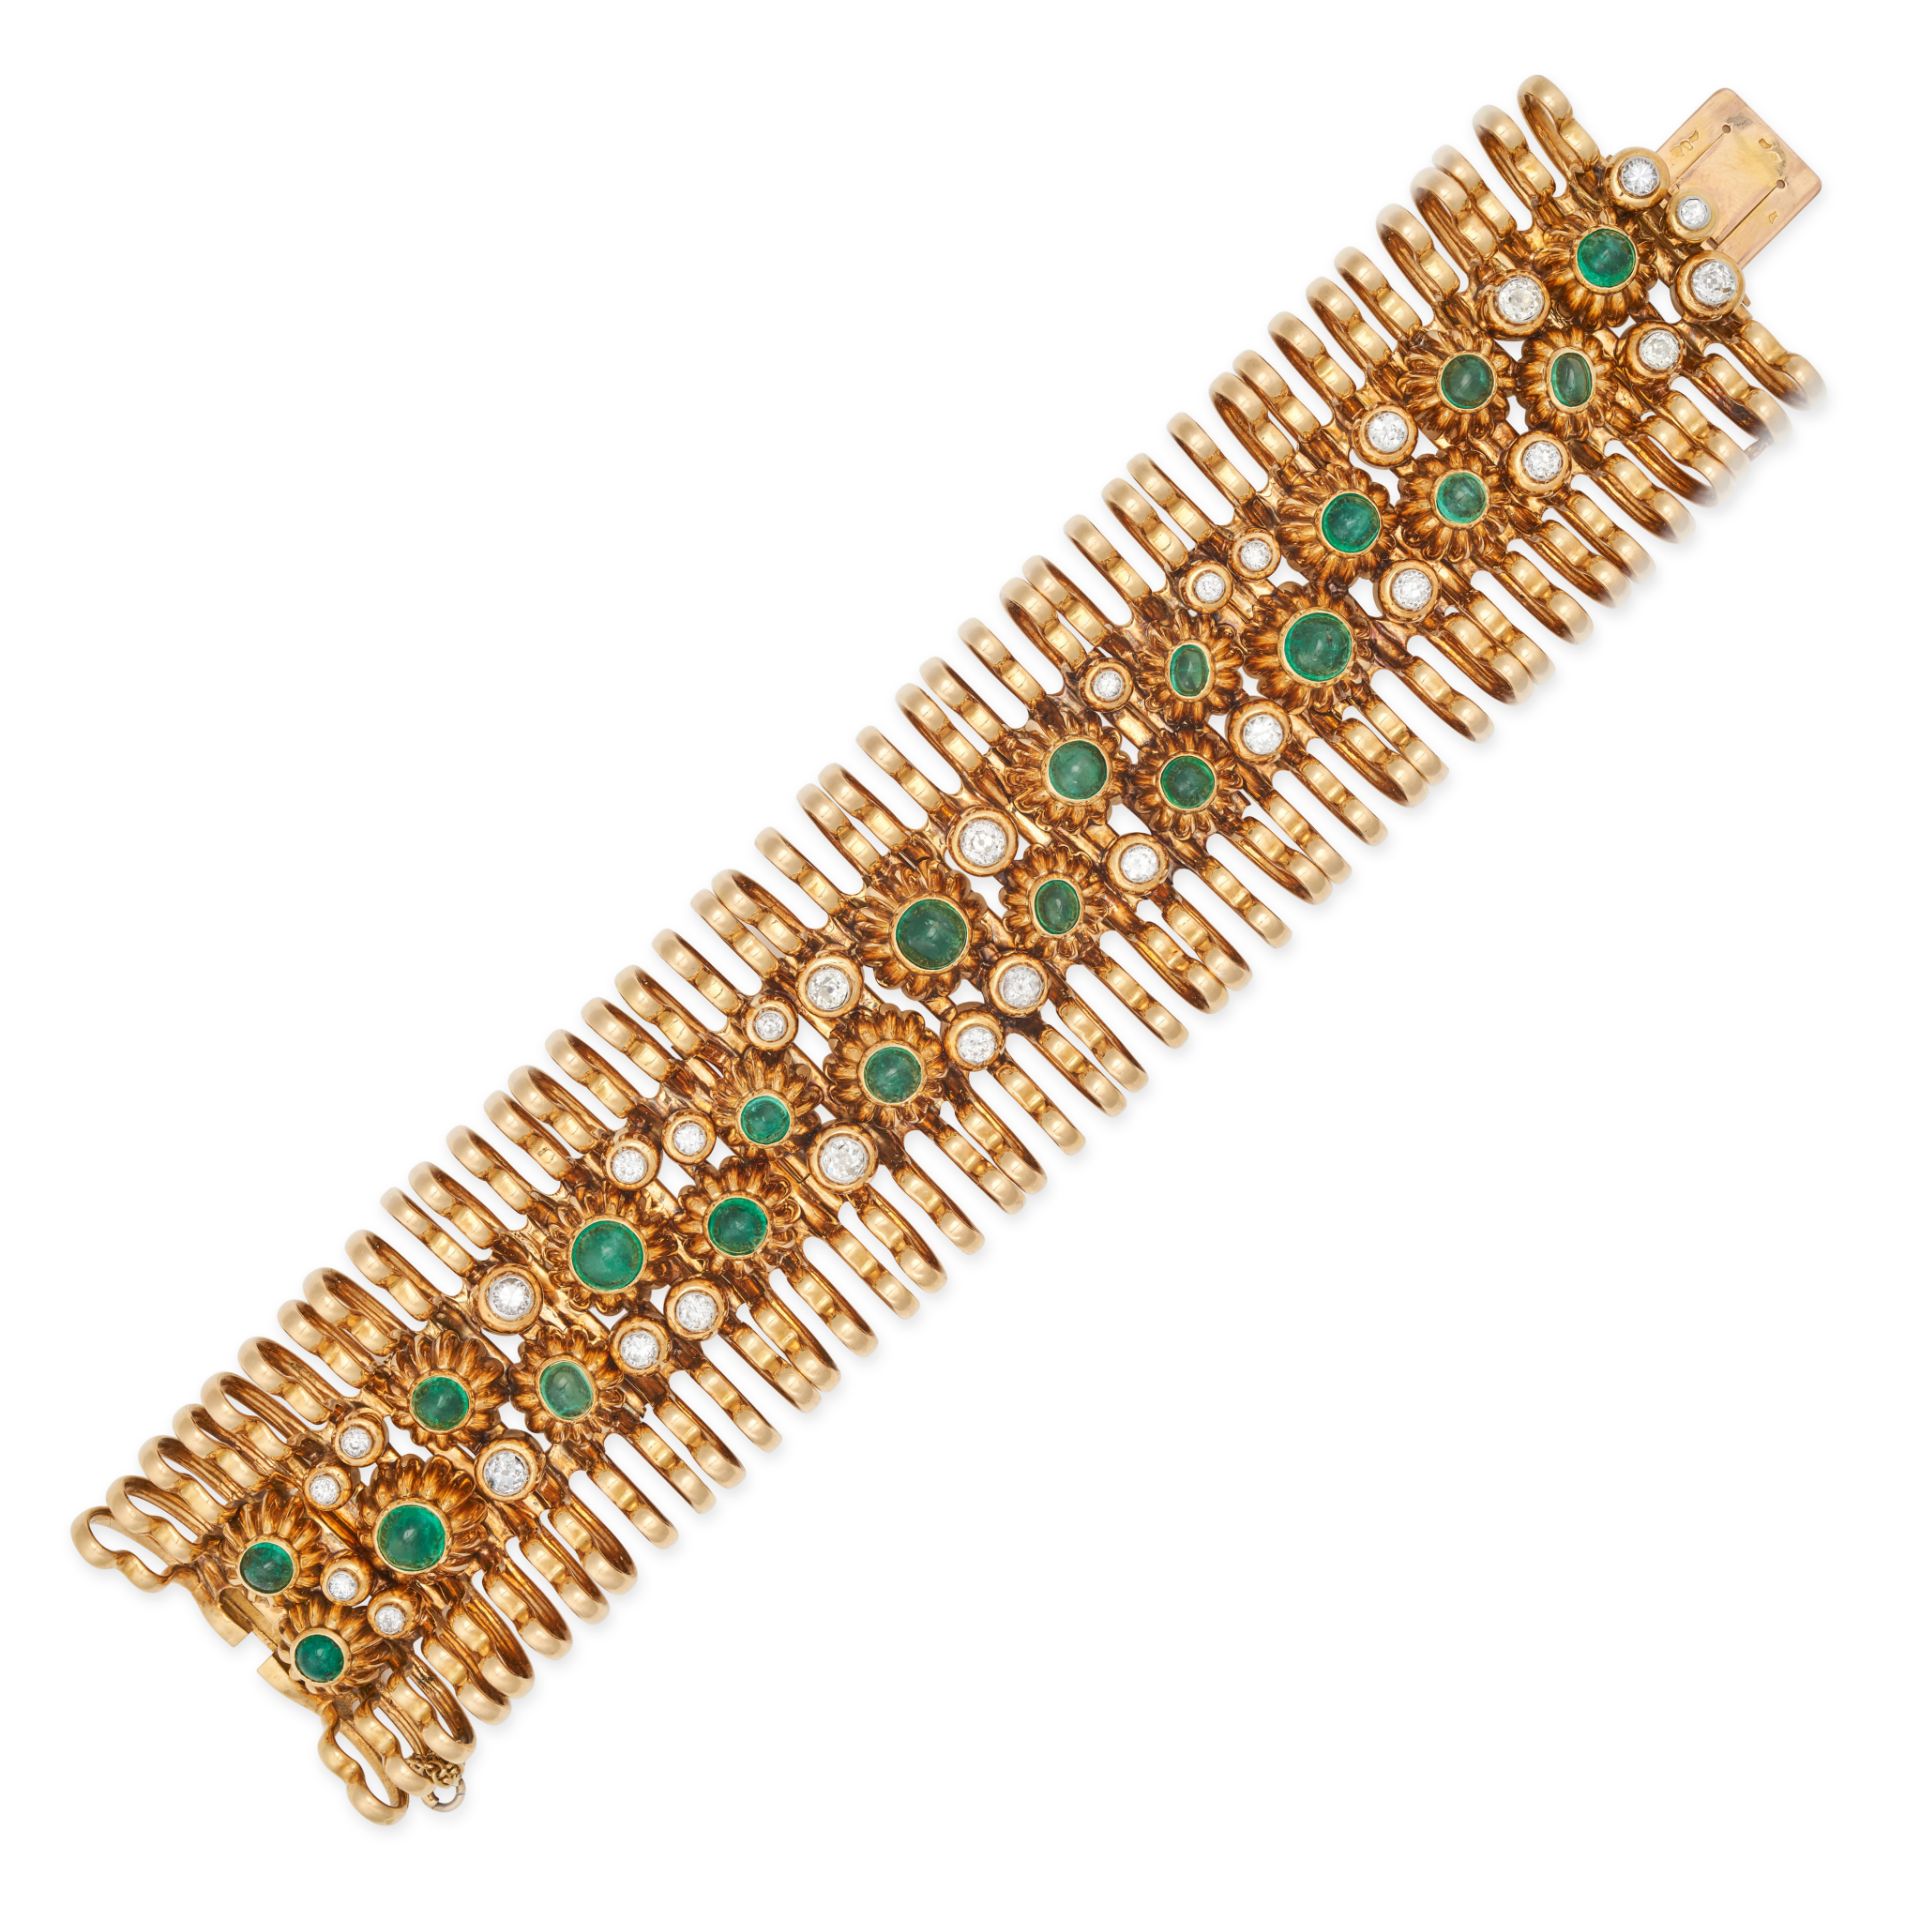 CHAUMET, AN EMERALD AND DIAMOND BRACELET in 18ct yellow gold and platinum, the stylised bracelet ...